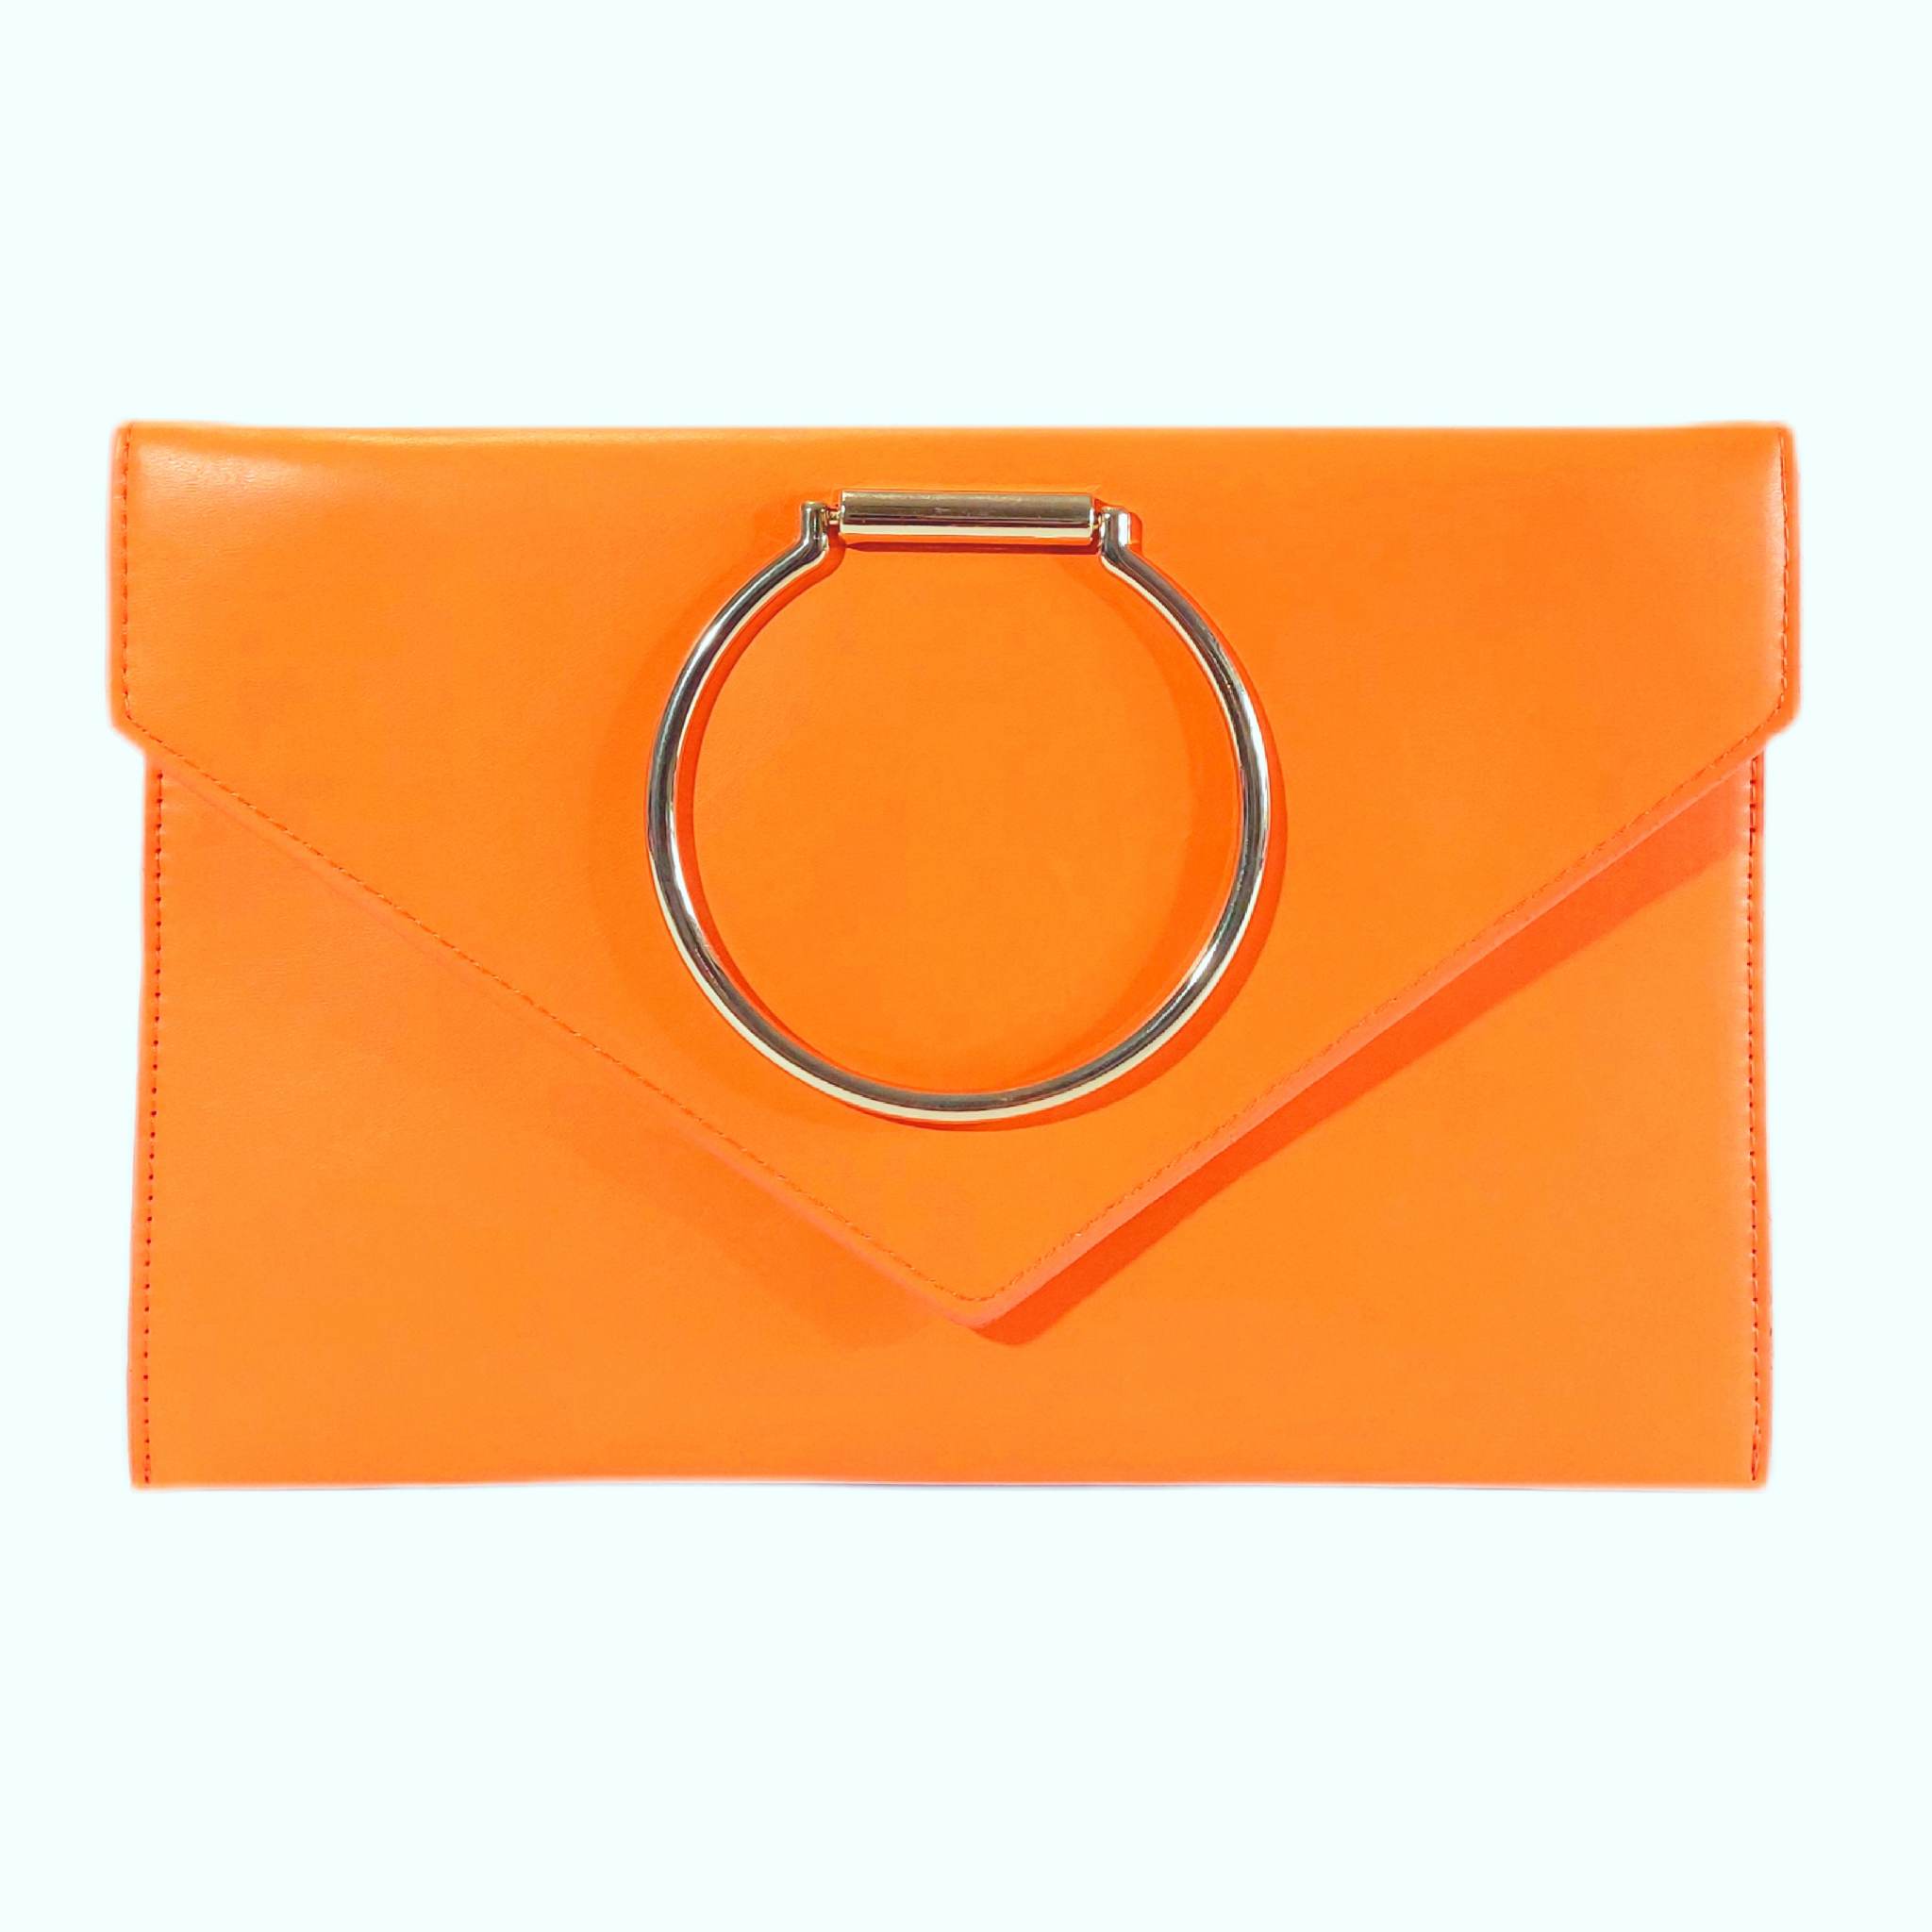 pu leather envelope clutch in orange from the divalicious candyland collection